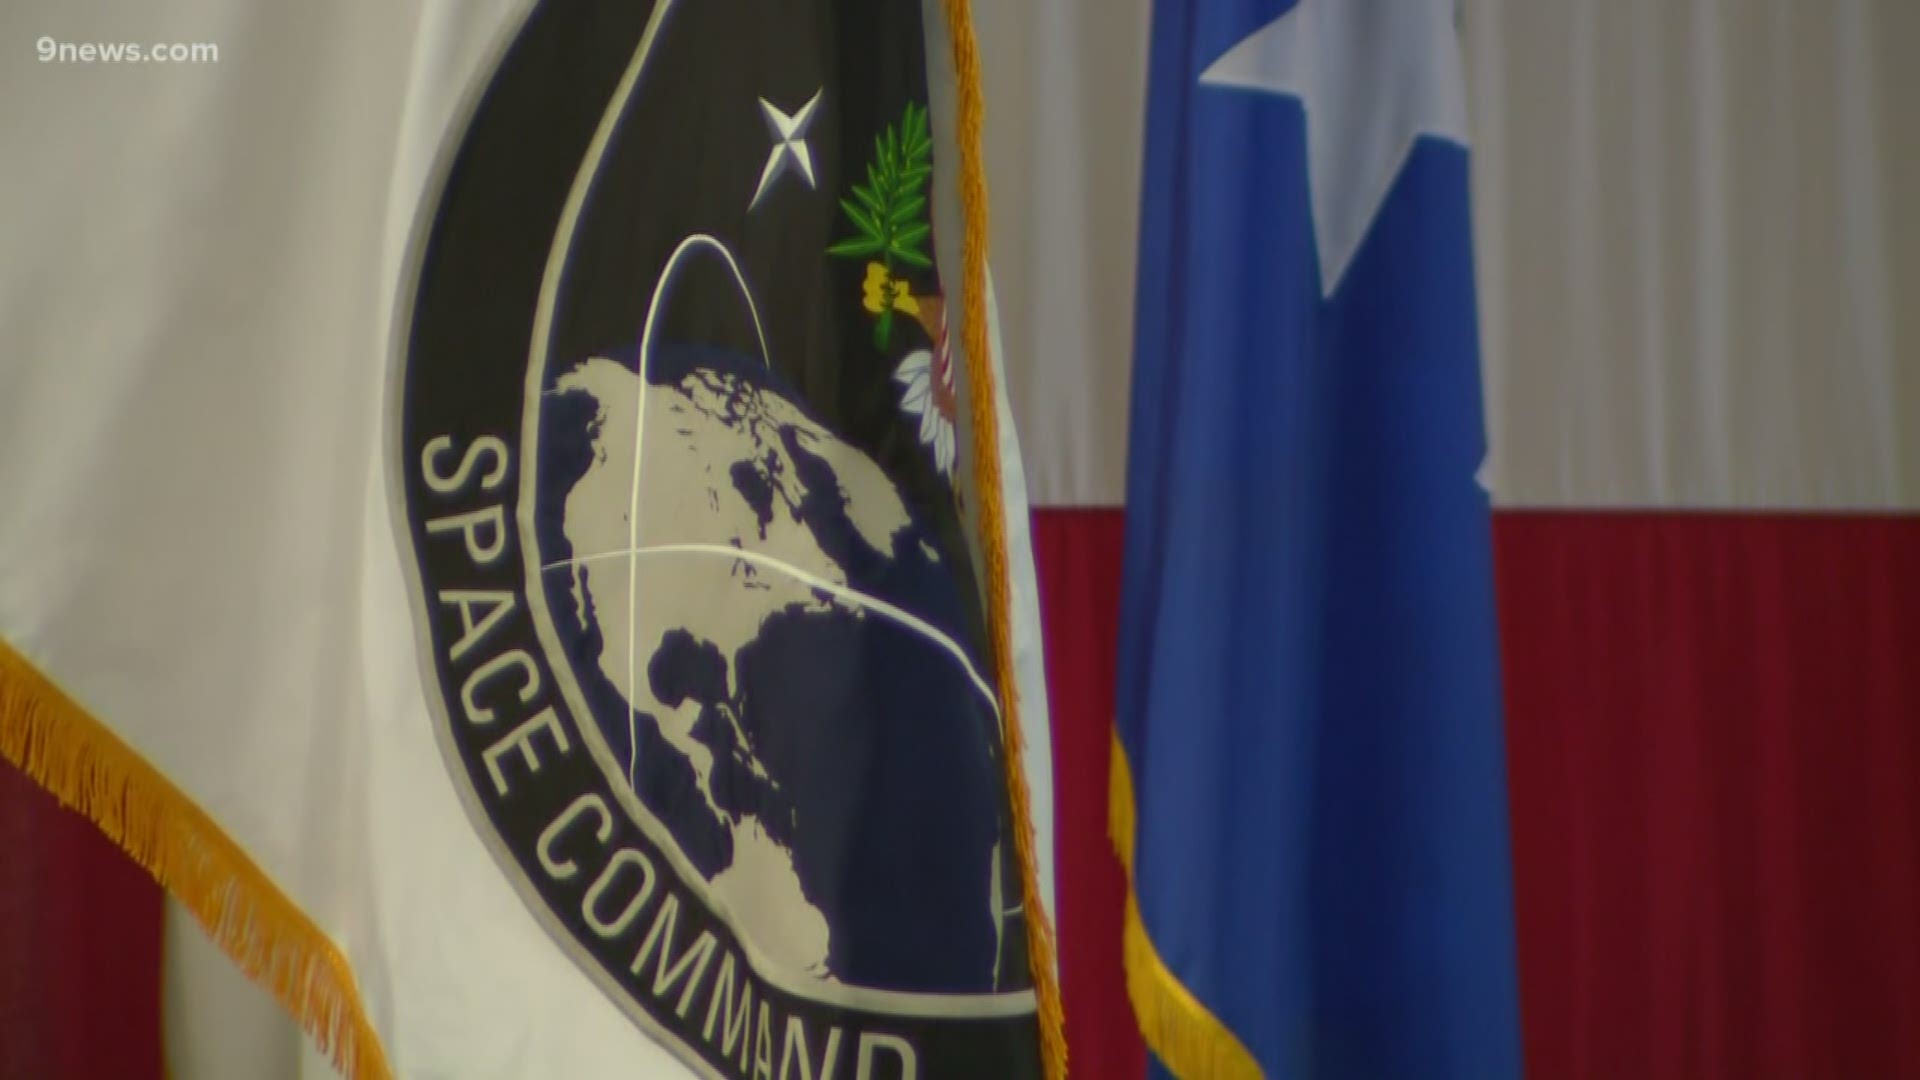 Operations officially got underway at the Space Command in Colorado Springs Monday morning with an establishment ceremony.